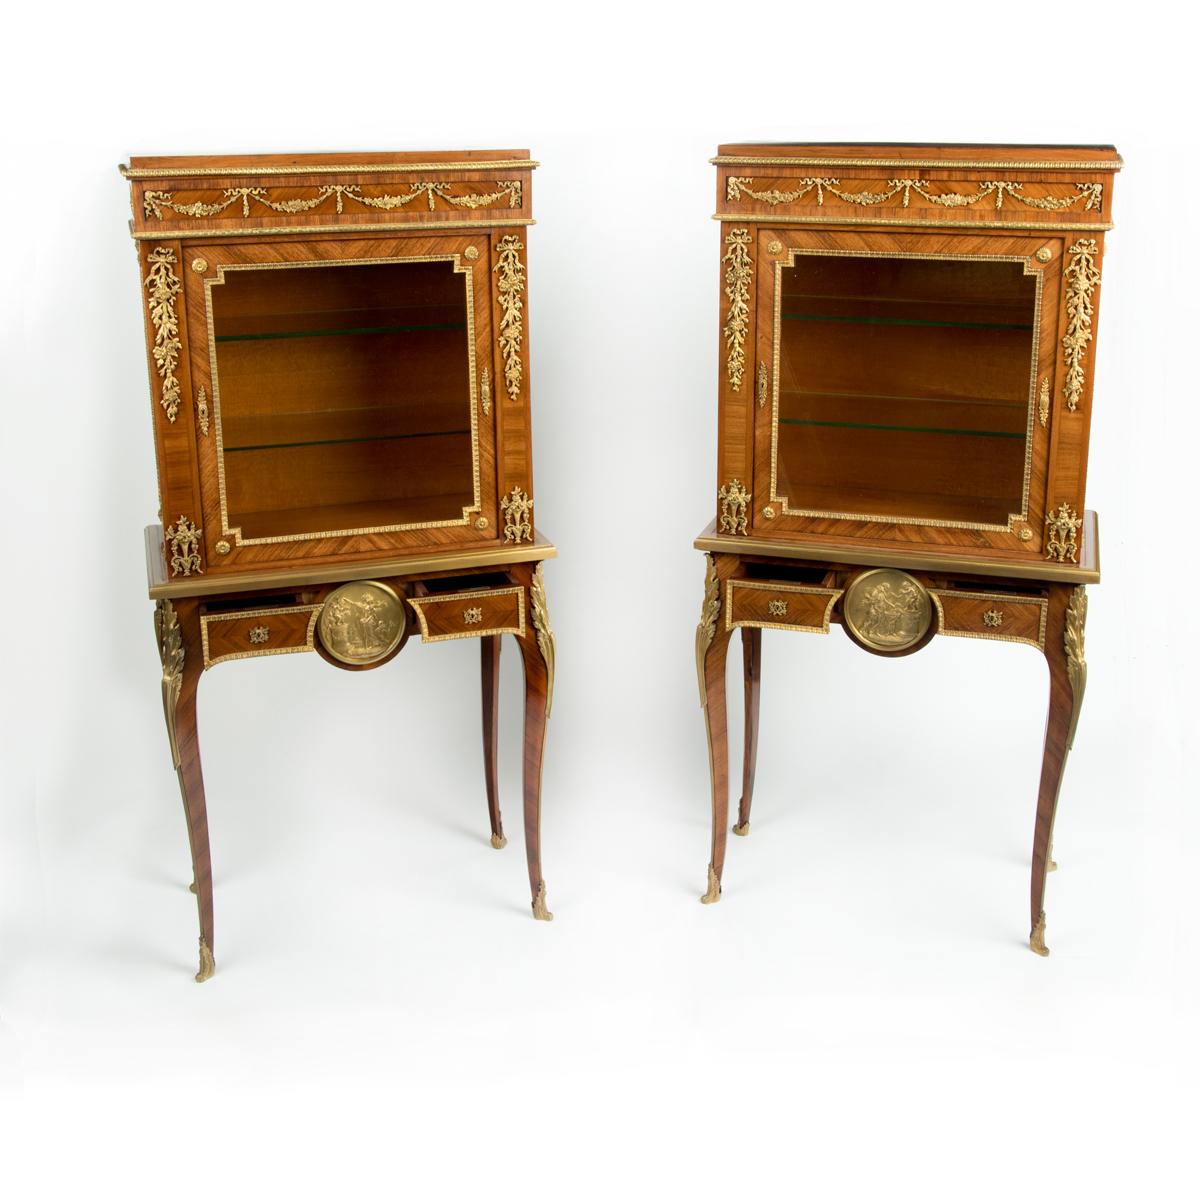 A pair of small Napoleon III kingwood display cabinets on stands, each of rectangular form with a single glazed cupboard set on a base with two disguised frieze drawers flanking a large classical ormolu roundel depicting lovers and cherubs, all on